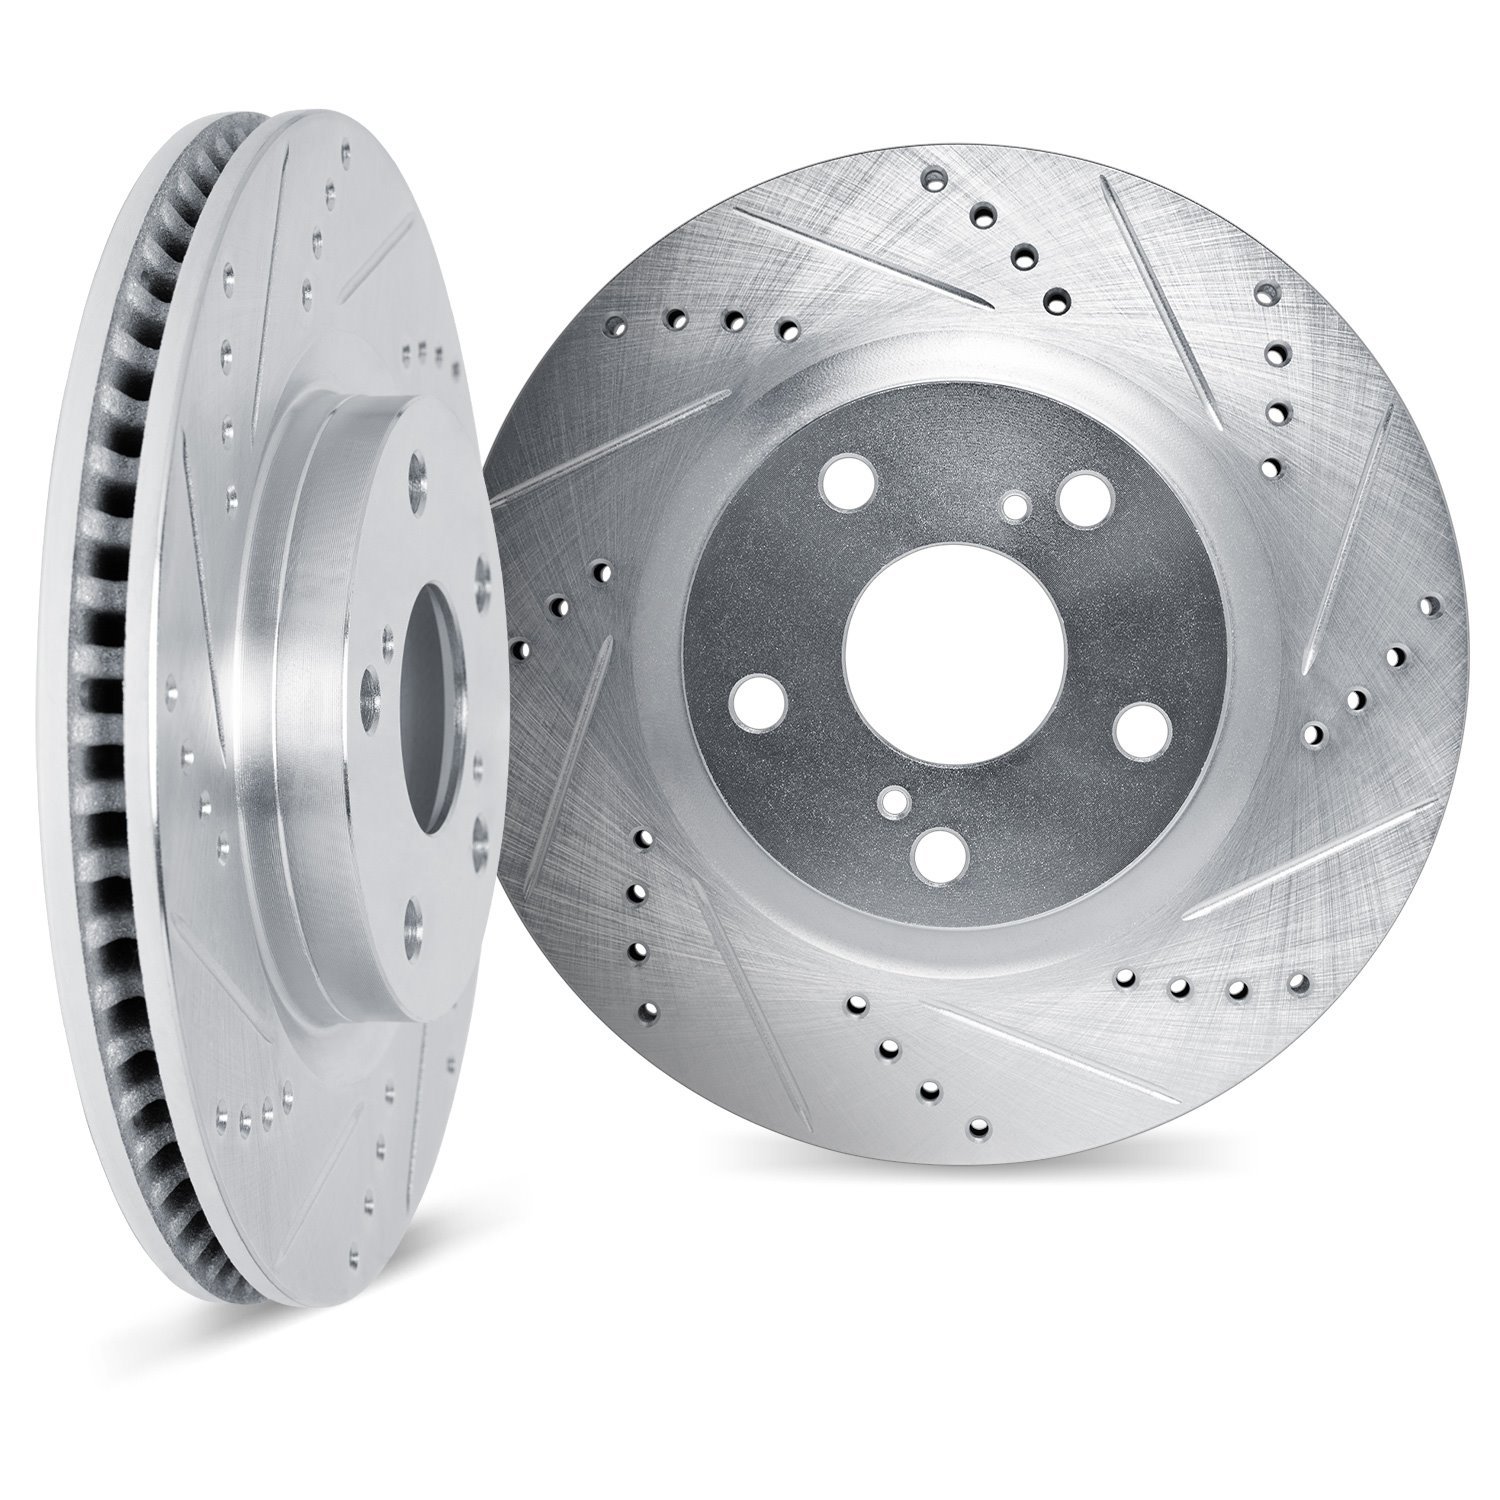 7002-75034 Drilled/Slotted Brake Rotors [Silver], Fits Select Lexus/Toyota/Scion, Position: Rear